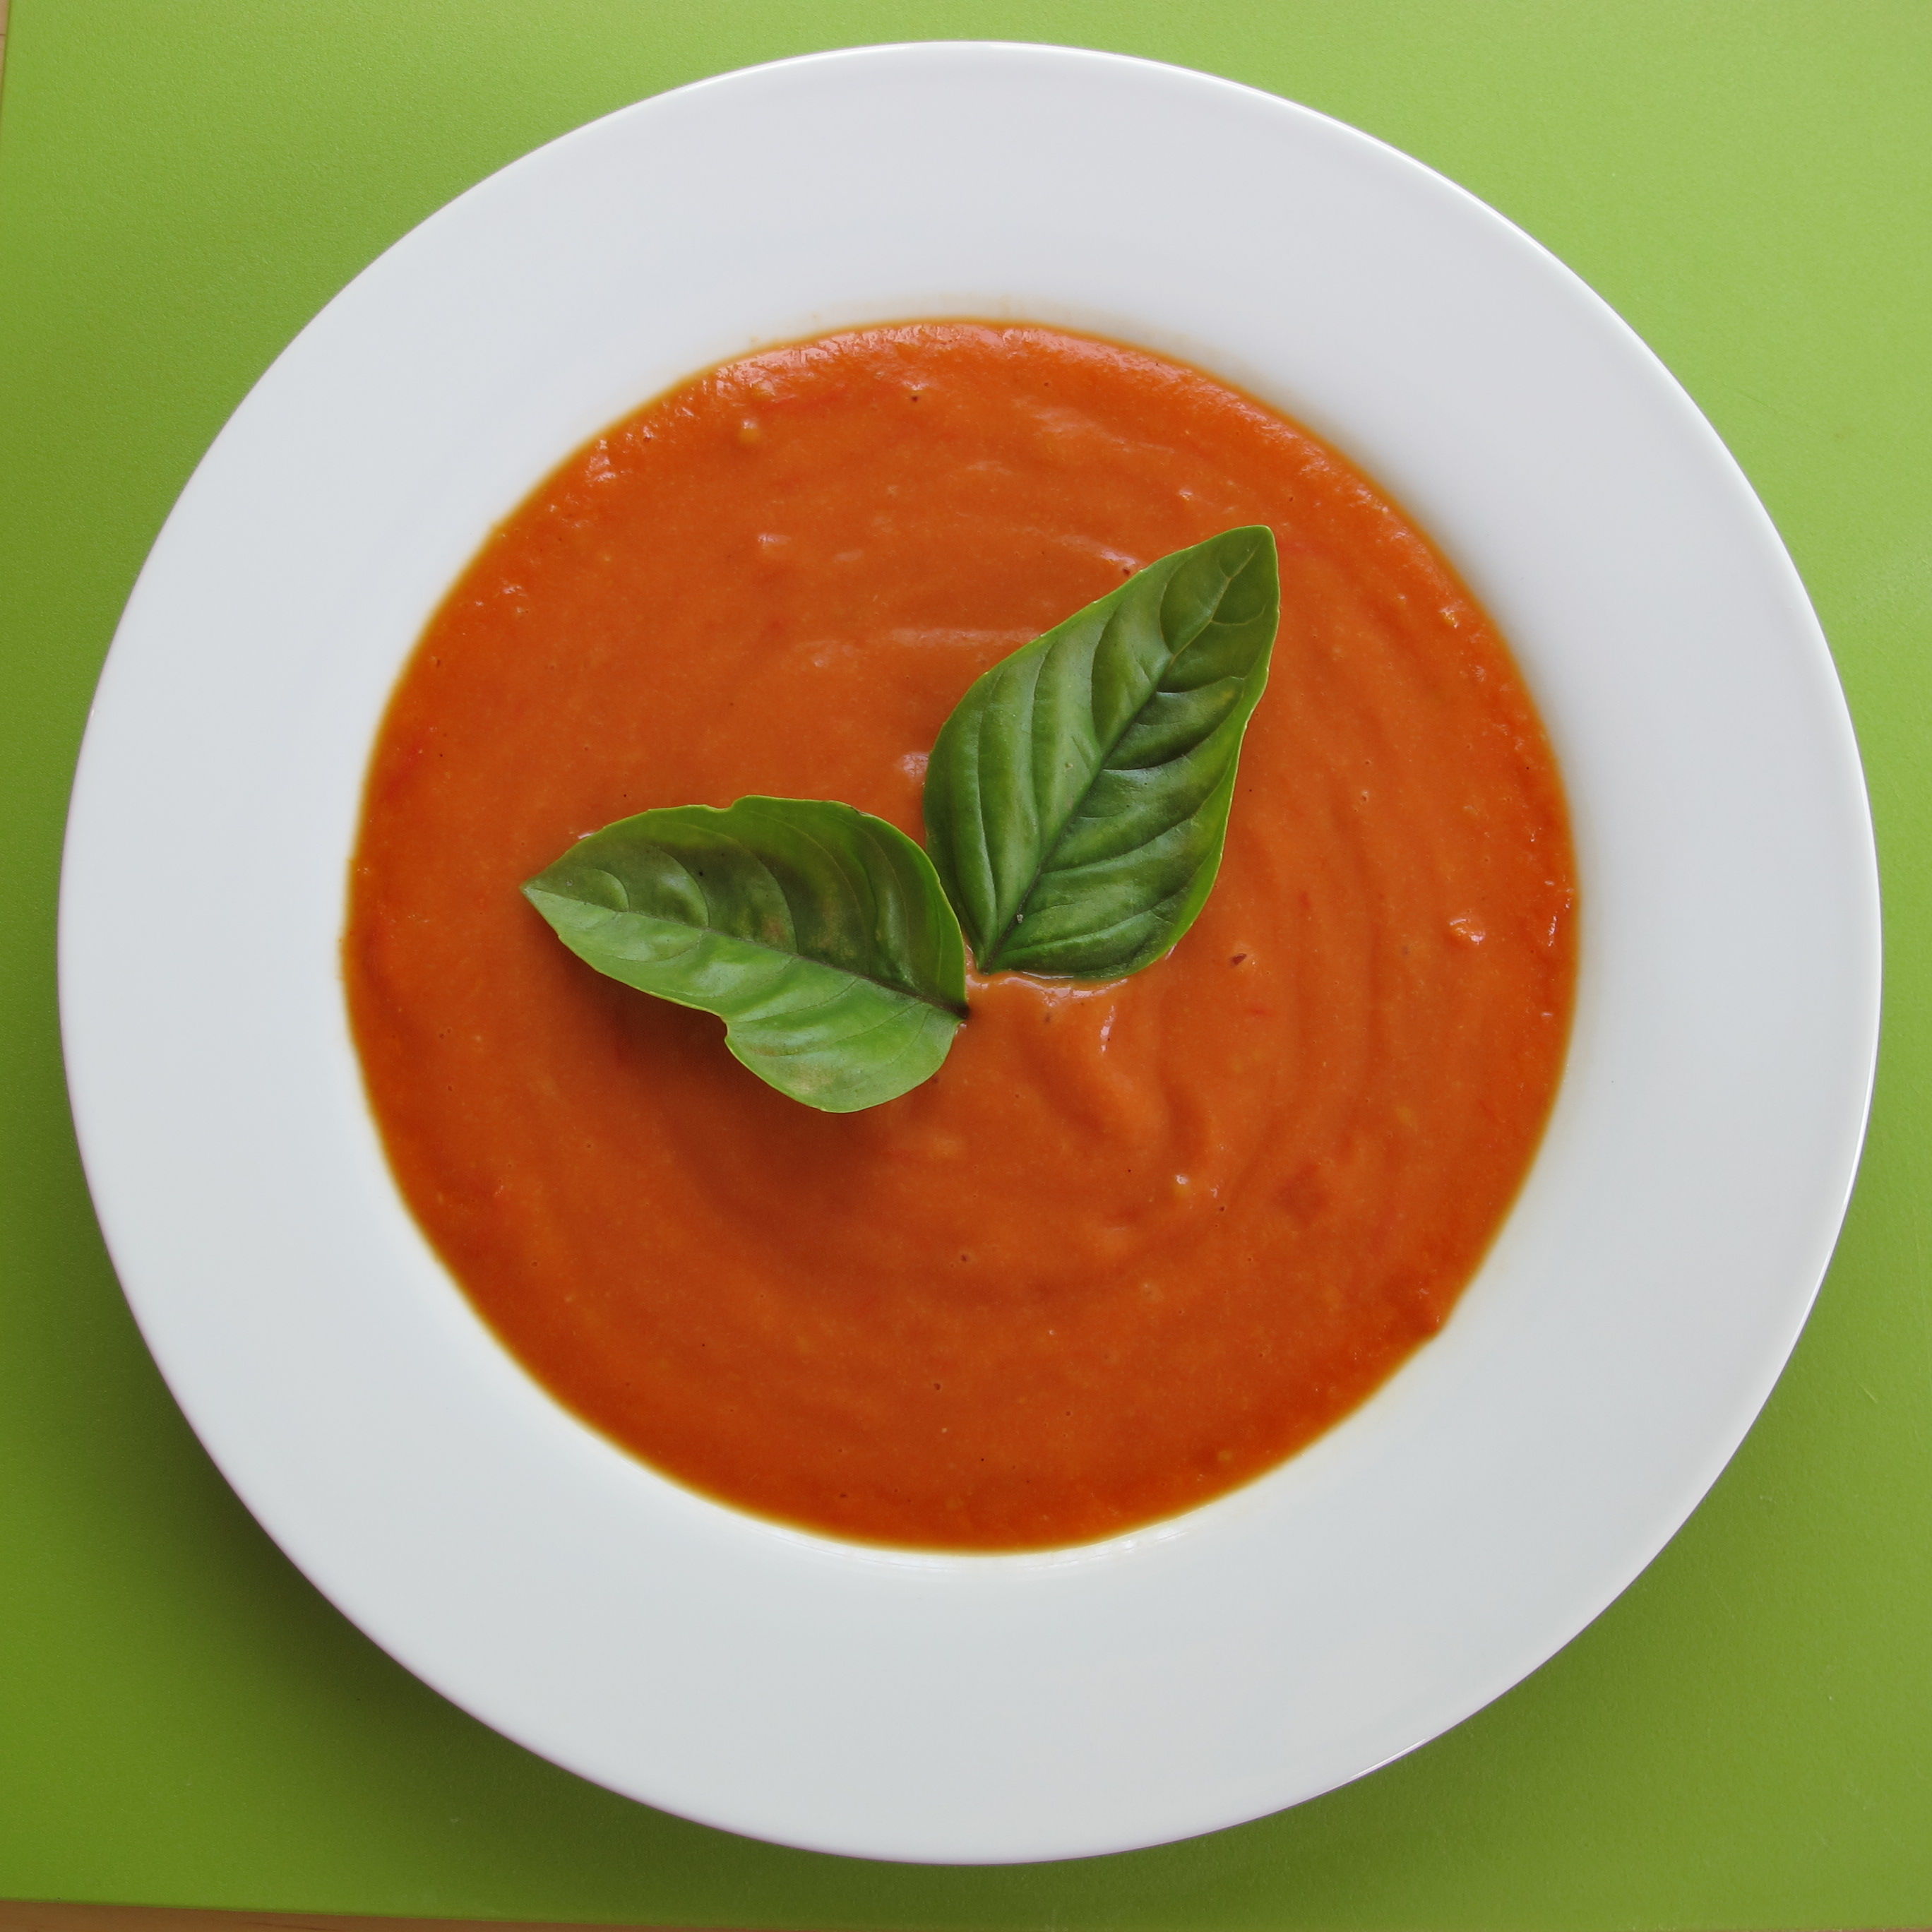 <p>In this vegan tomato soup recipe, you'll not only experience double the flavor from regular tomatoes and cherry tomatoes, but a healthy dose of vitamins and fiber from keeping the skin on as well. To really wow your dinner guests, top the finished soup with sprigs of basil leaves. </p>
                          